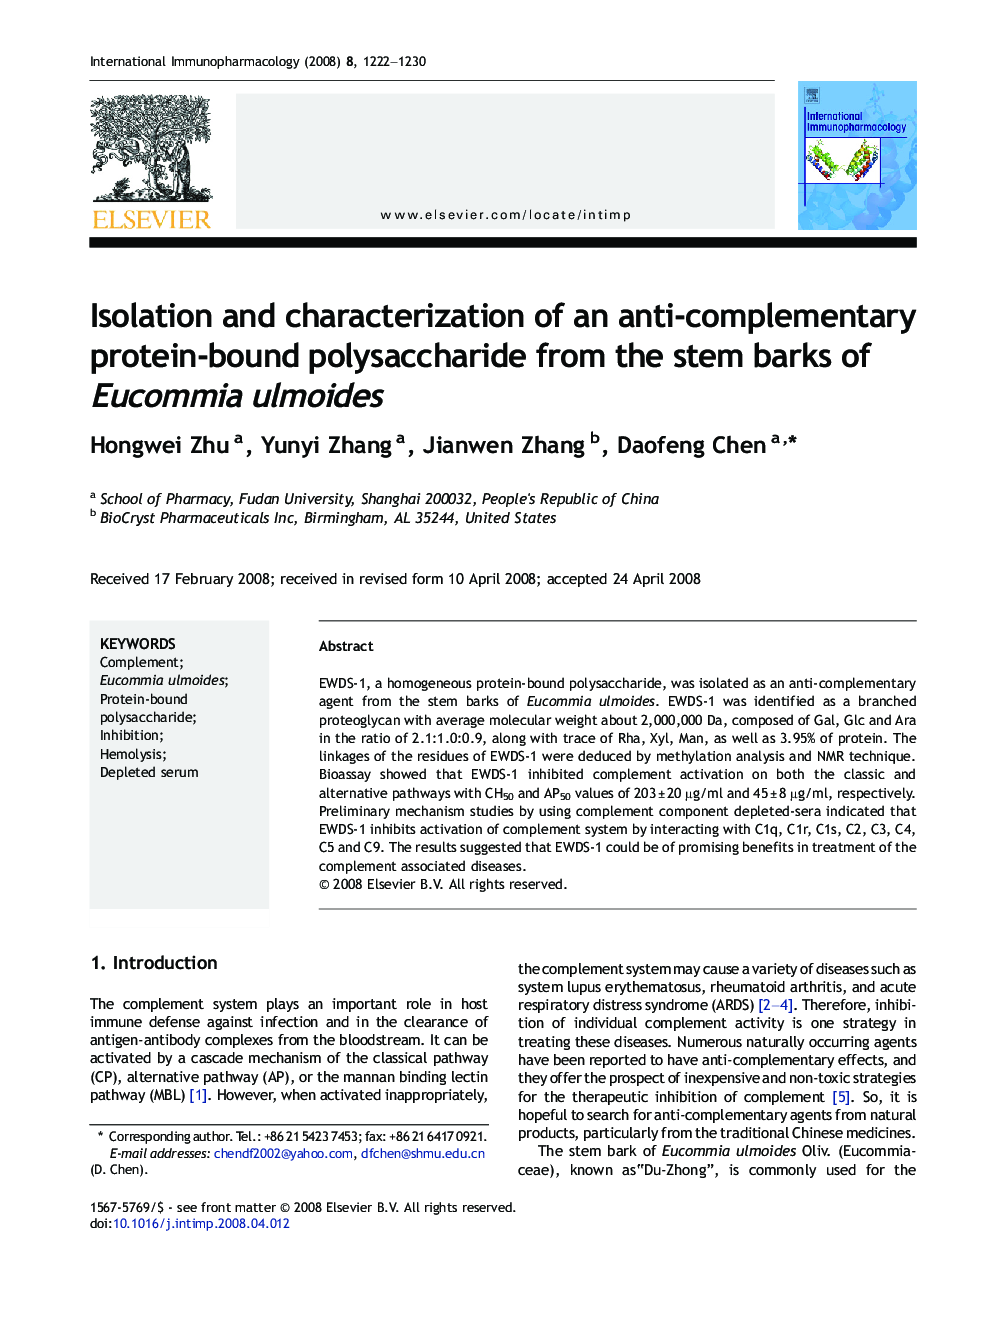 Isolation and characterization of an anti-complementary protein-bound polysaccharide from the stem barks of Eucommia ulmoides